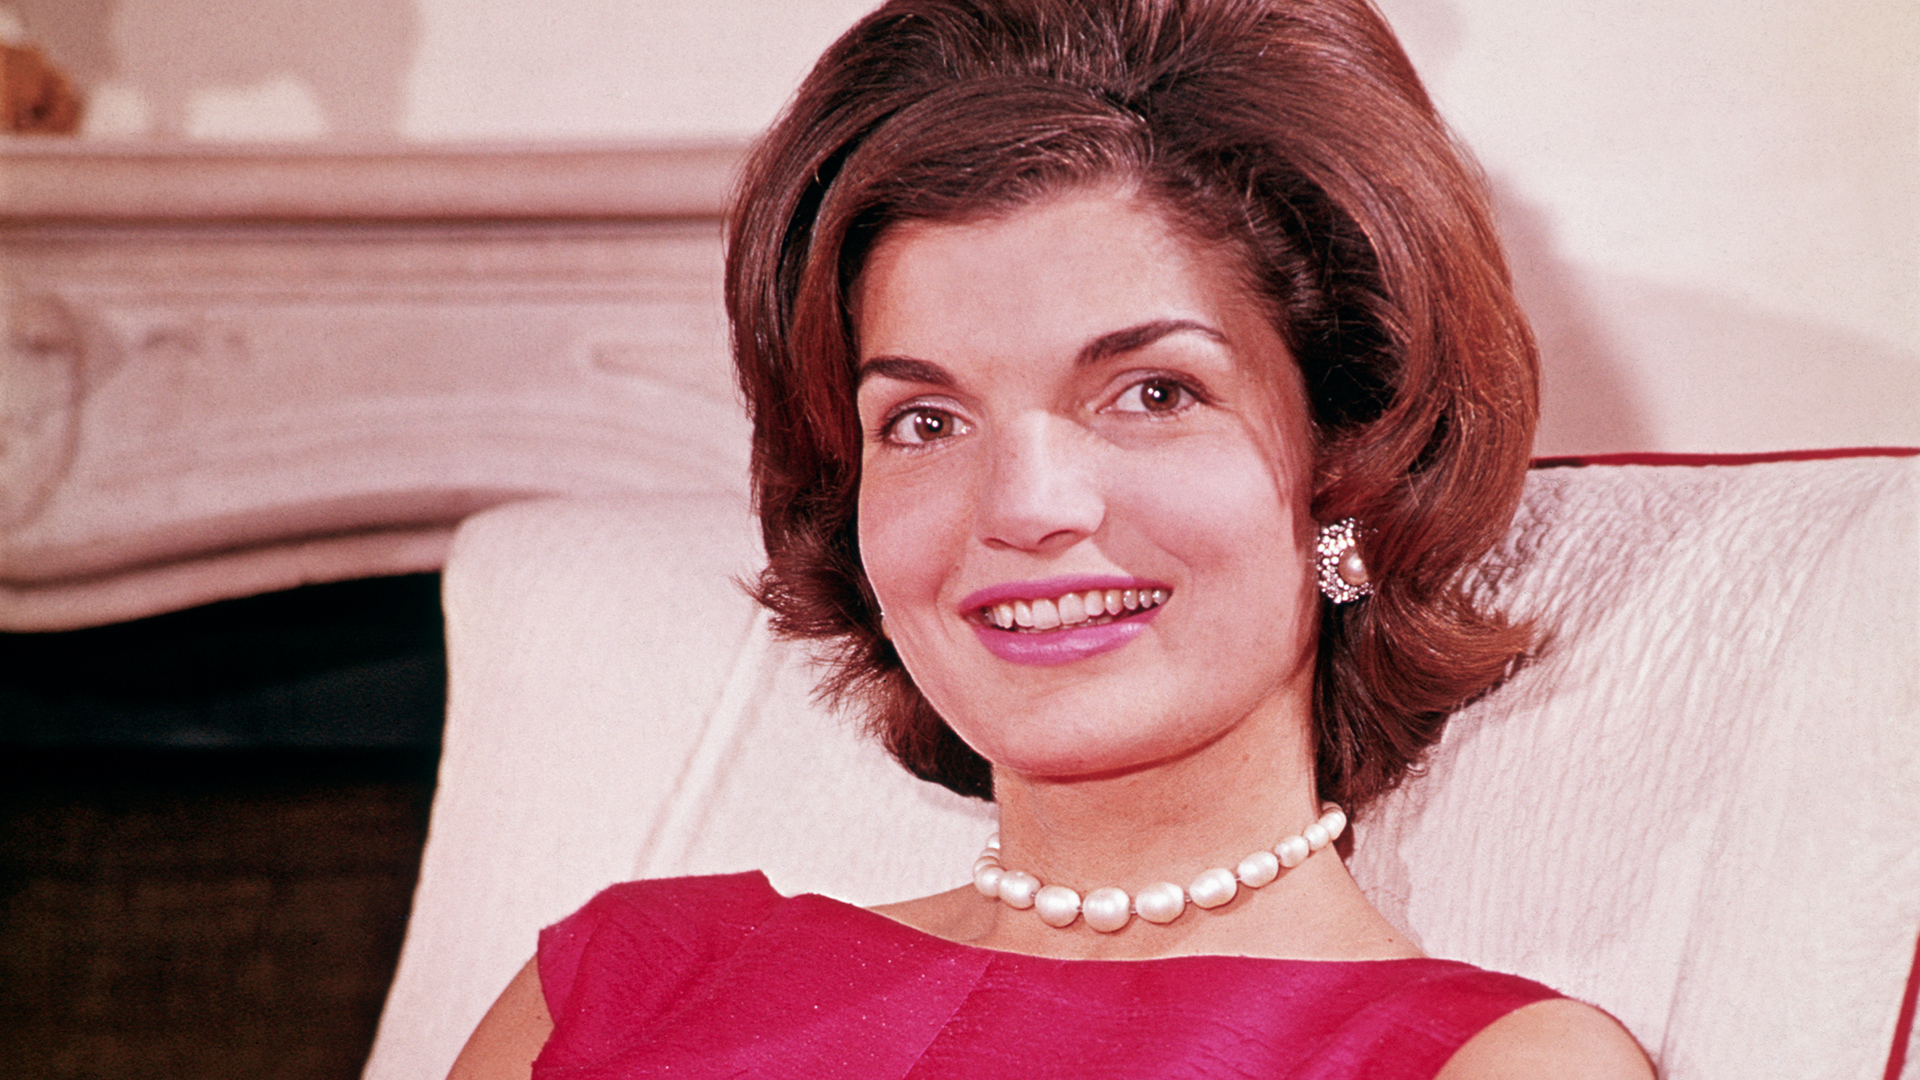 July 28, 1929: Jacqueline Kennedy Onassis Was Born